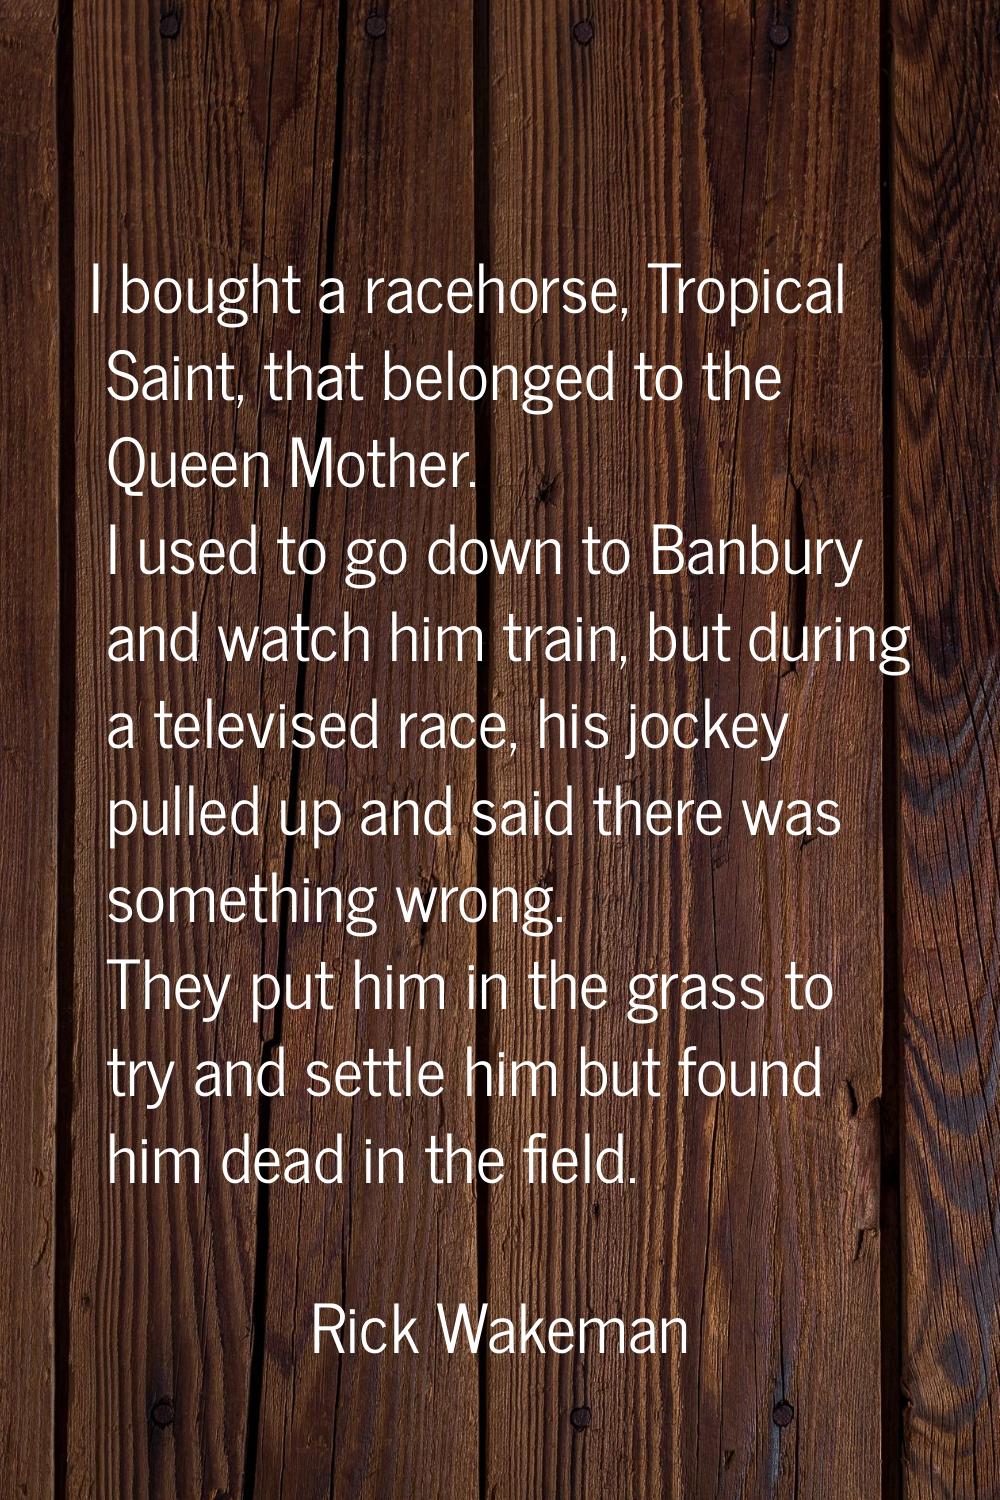 I bought a racehorse, Tropical Saint, that belonged to the Queen Mother. I used to go down to Banbu